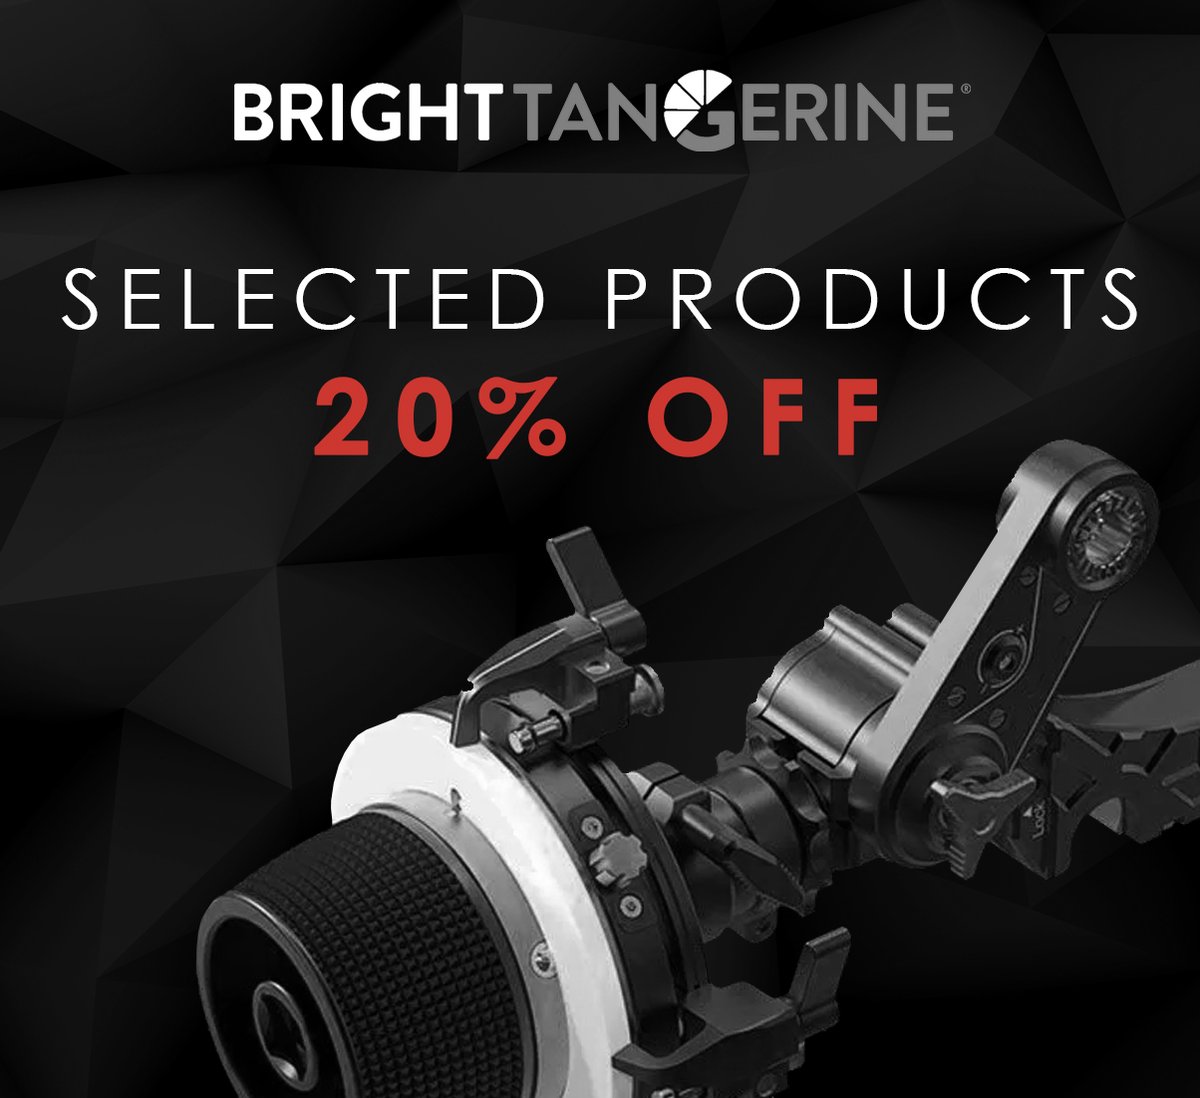 💥 Save 20% on selected Bright Tangerine products! 💥 View deal on our website:bit.ly/49ILIfr